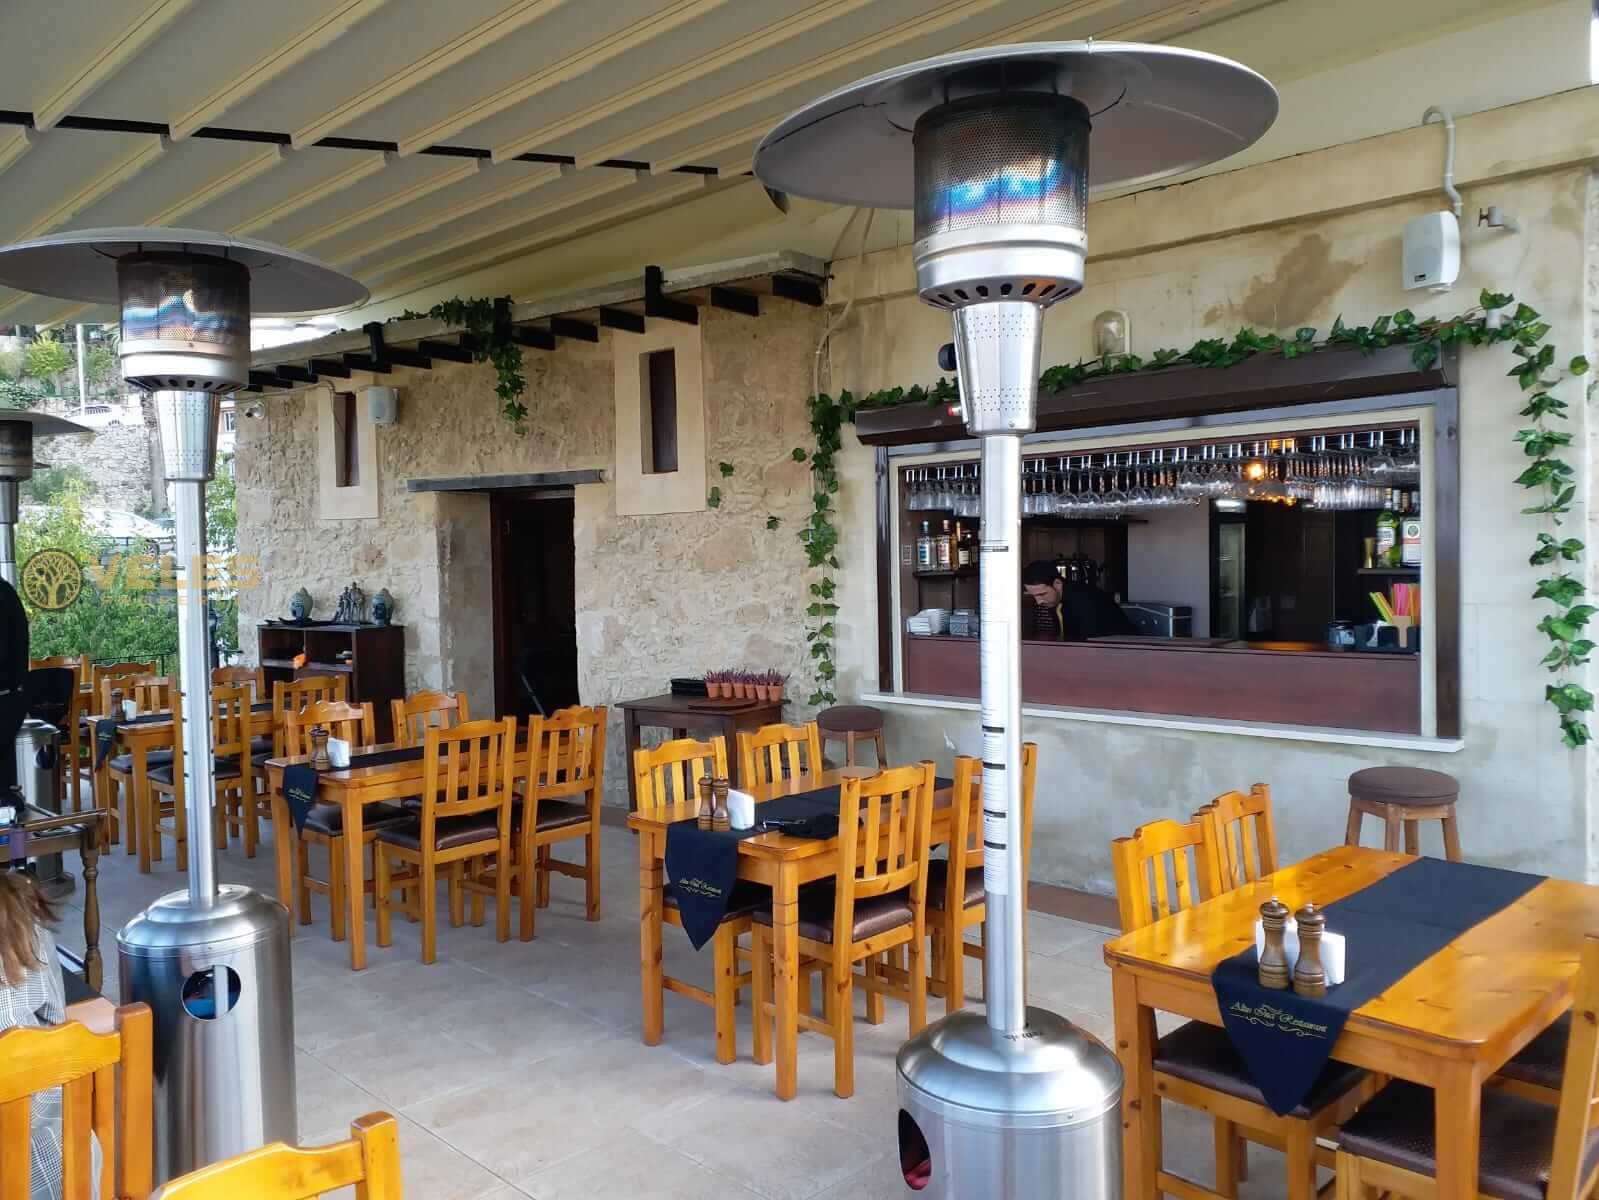 Buy ready business in Northern Cyprus, SC-023 Restaurant in Lapta, Veles